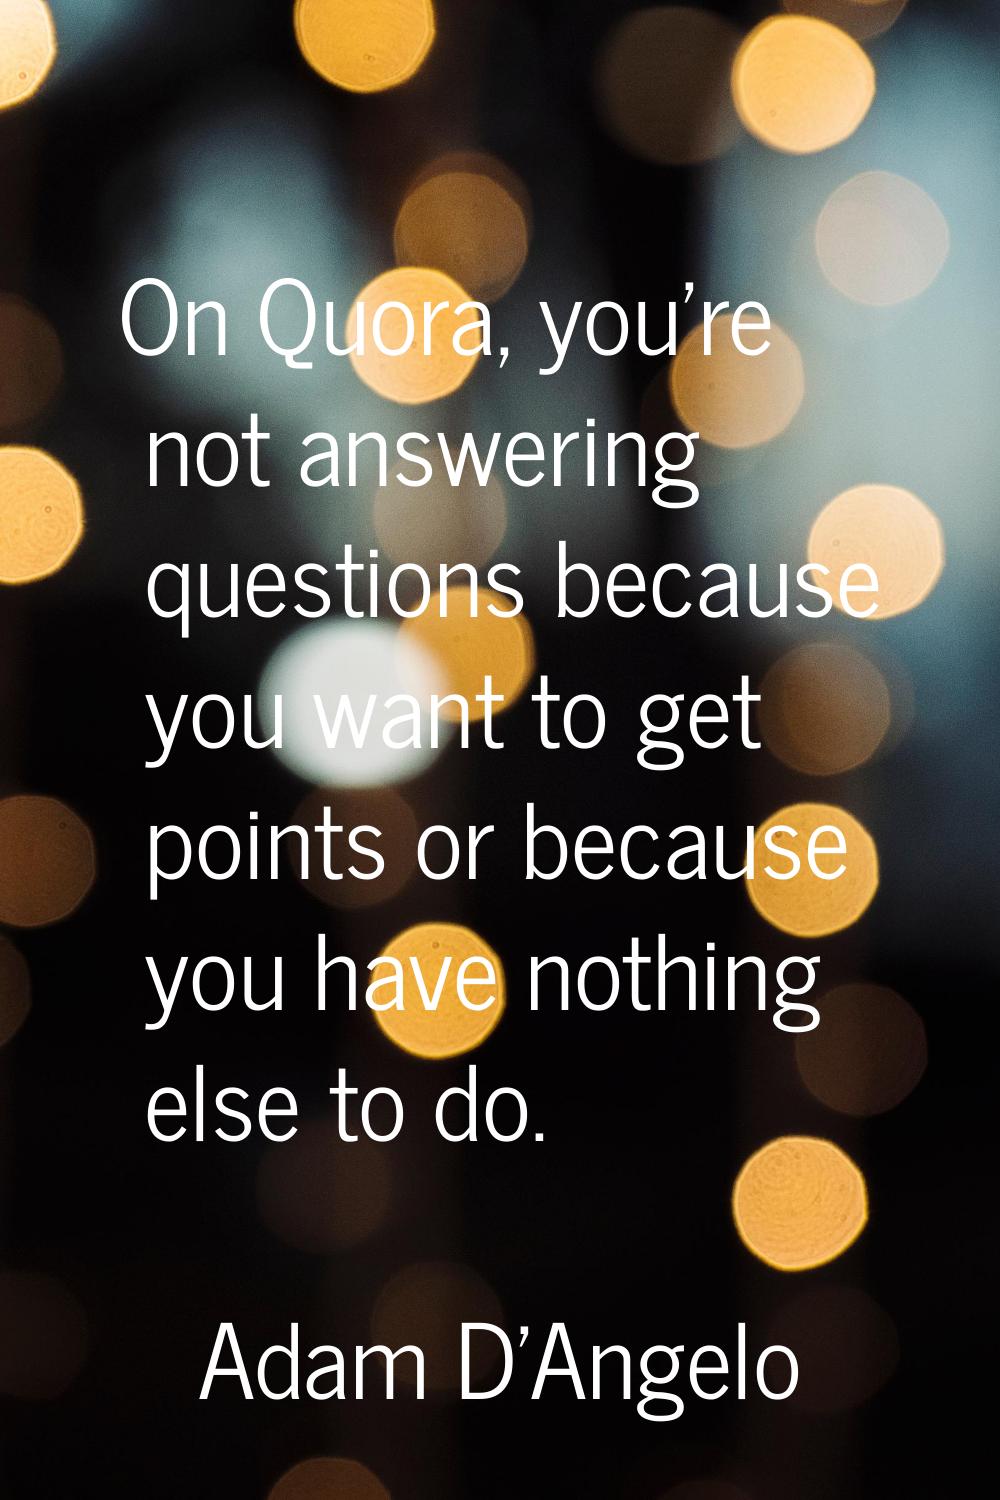 On Quora, you're not answering questions because you want to get points or because you have nothing